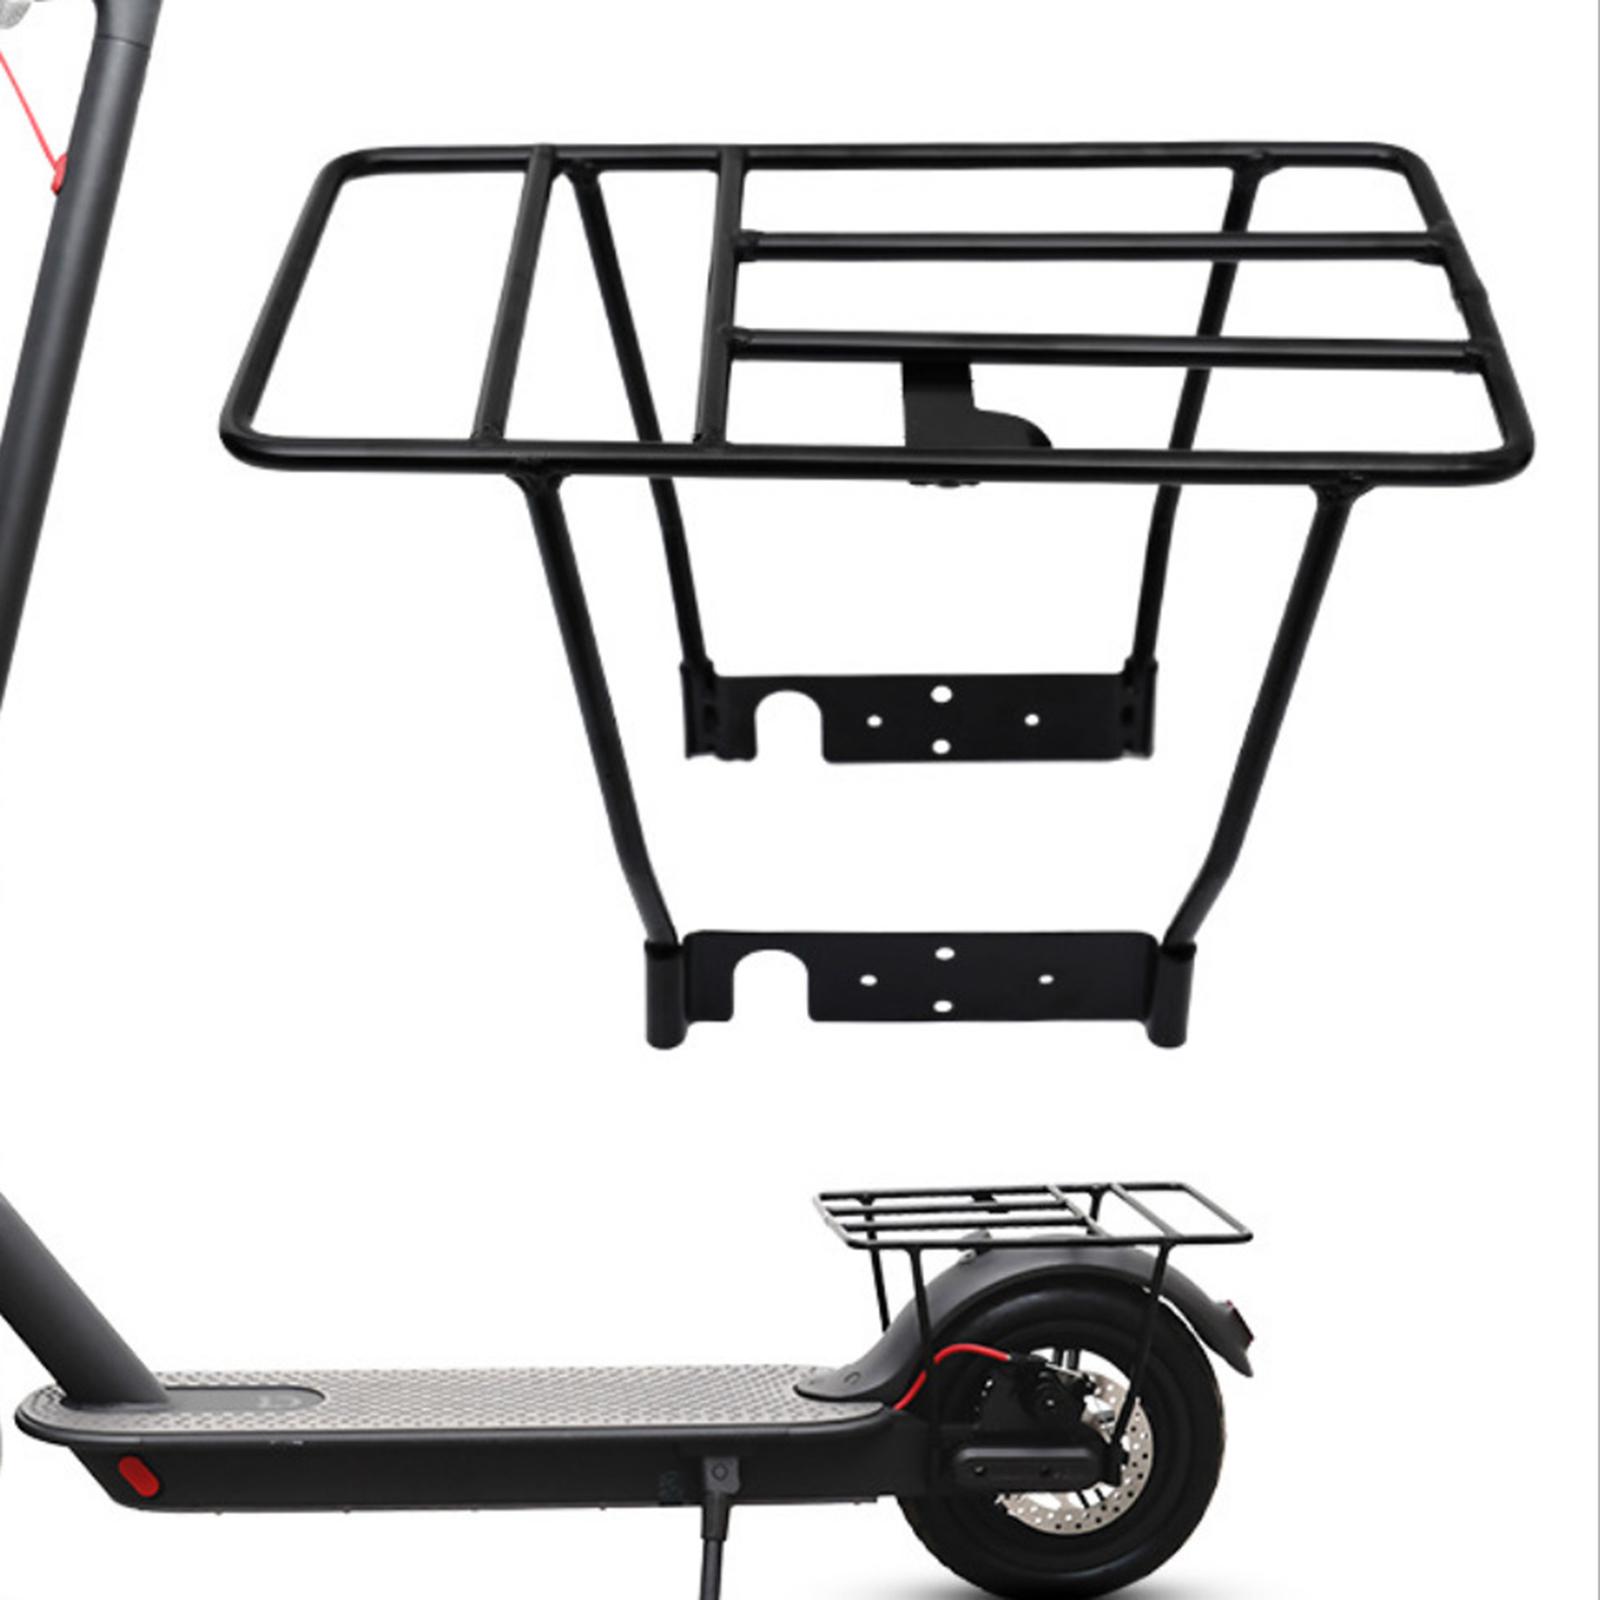 Electric Scooter Rear Rack Support DIY Rustproof for Raincoats Luggage